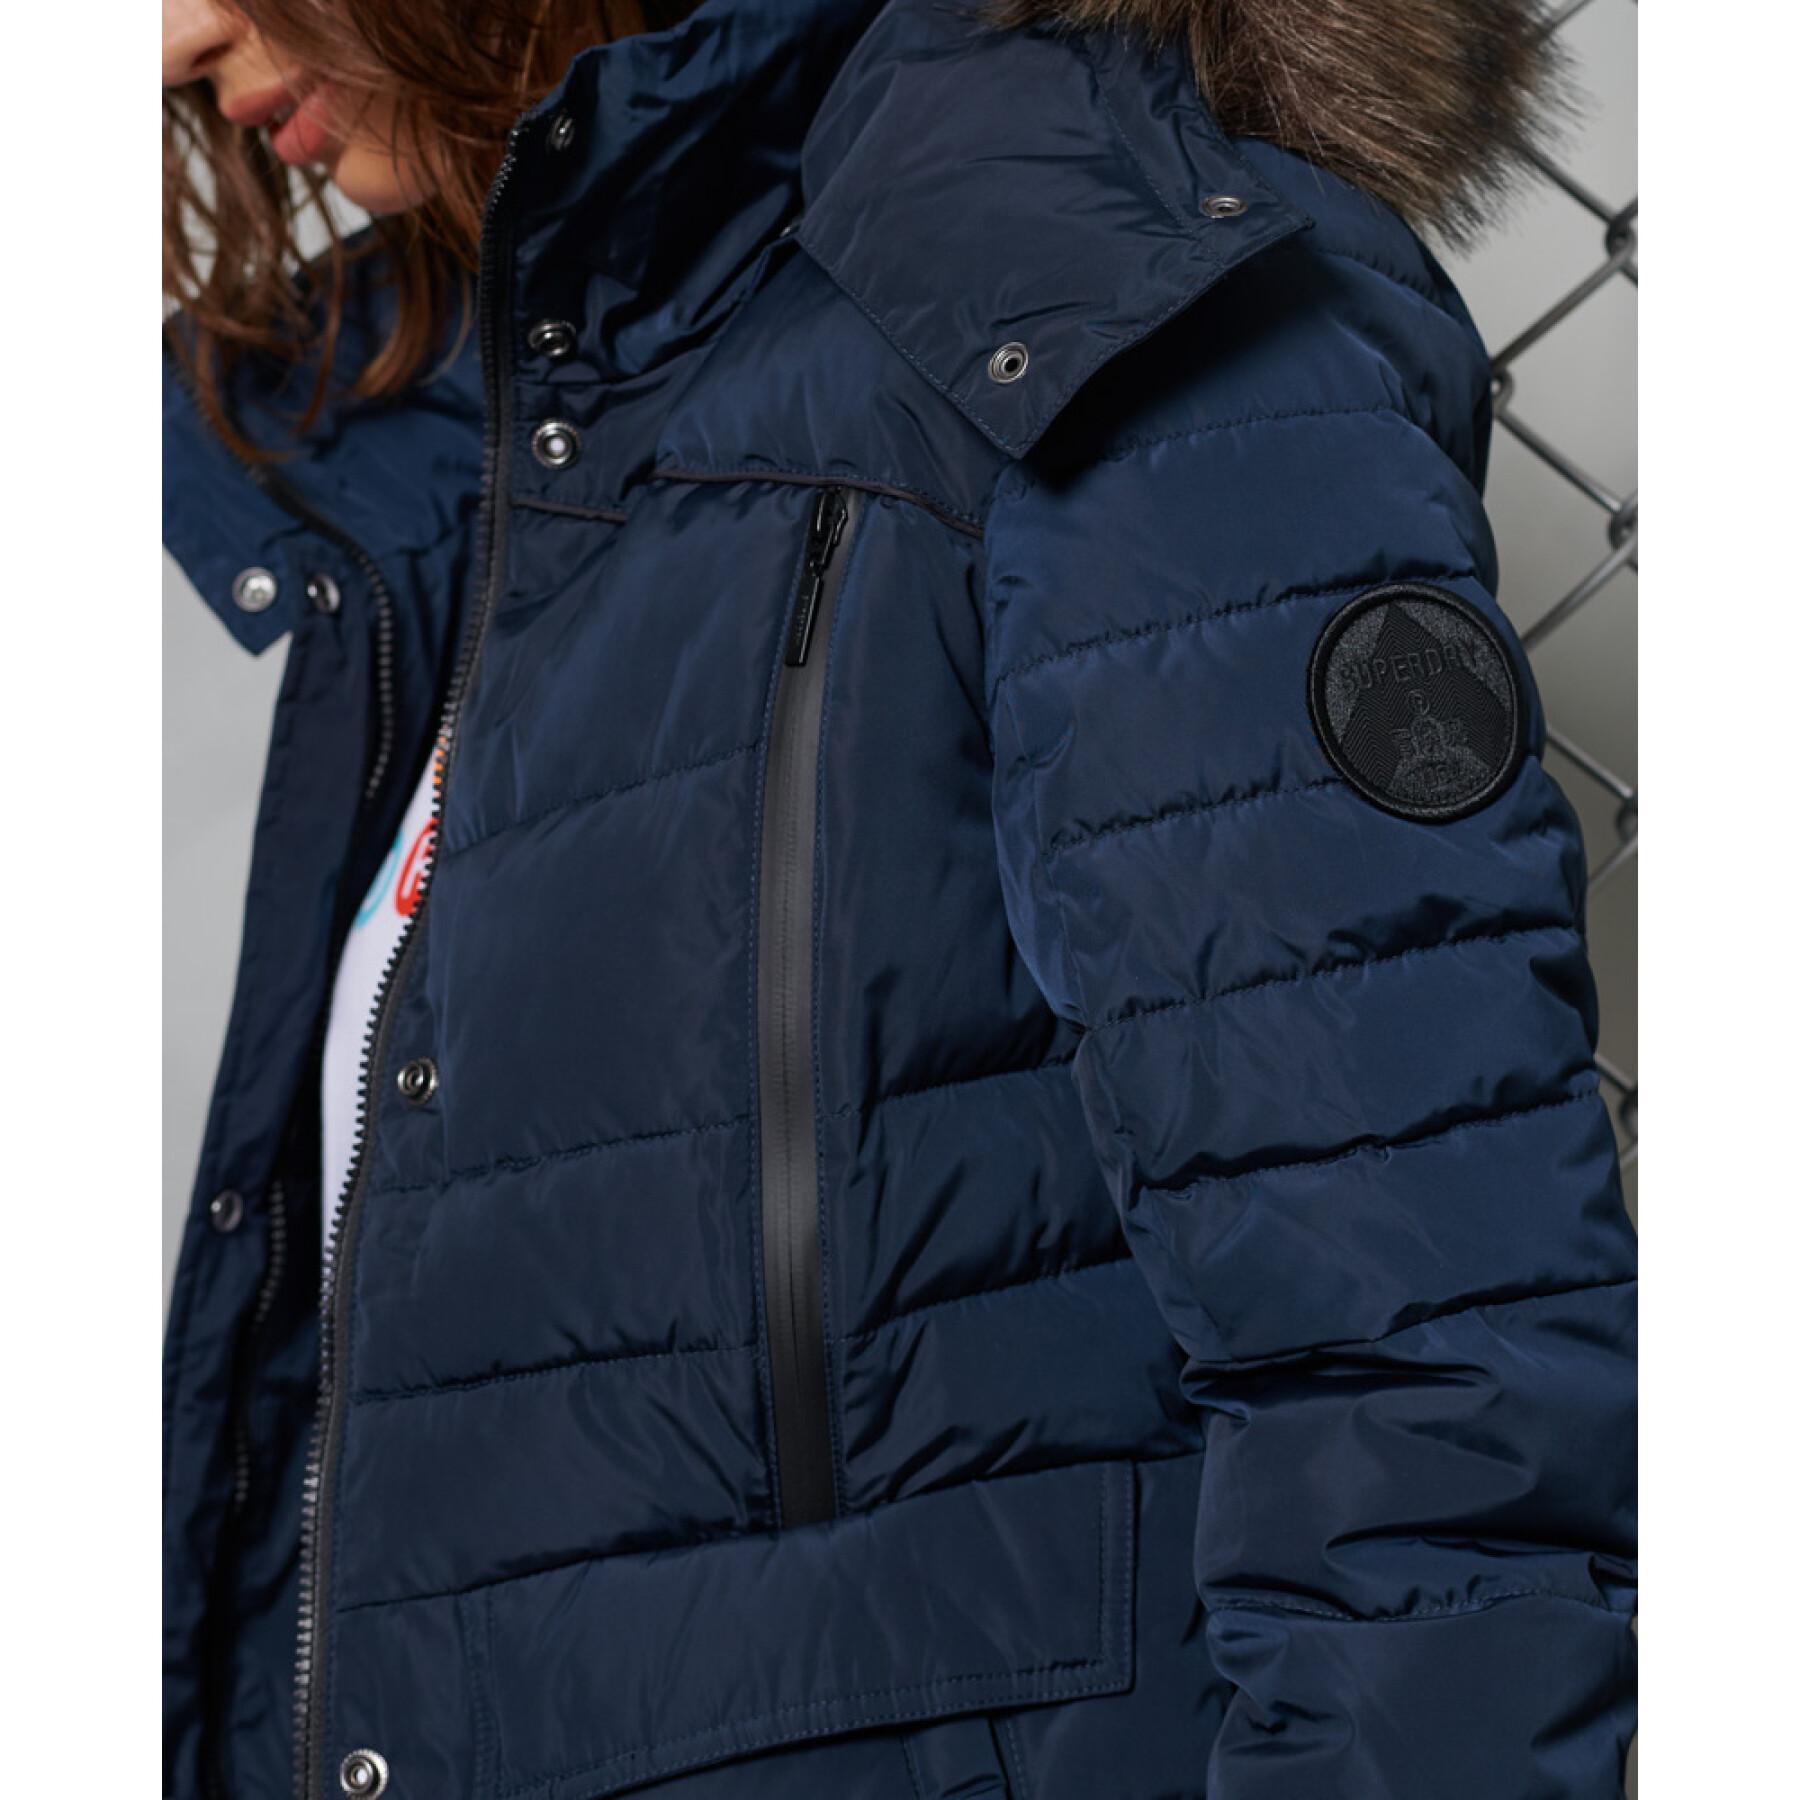 Quilted jacket for women Superdry Glacier